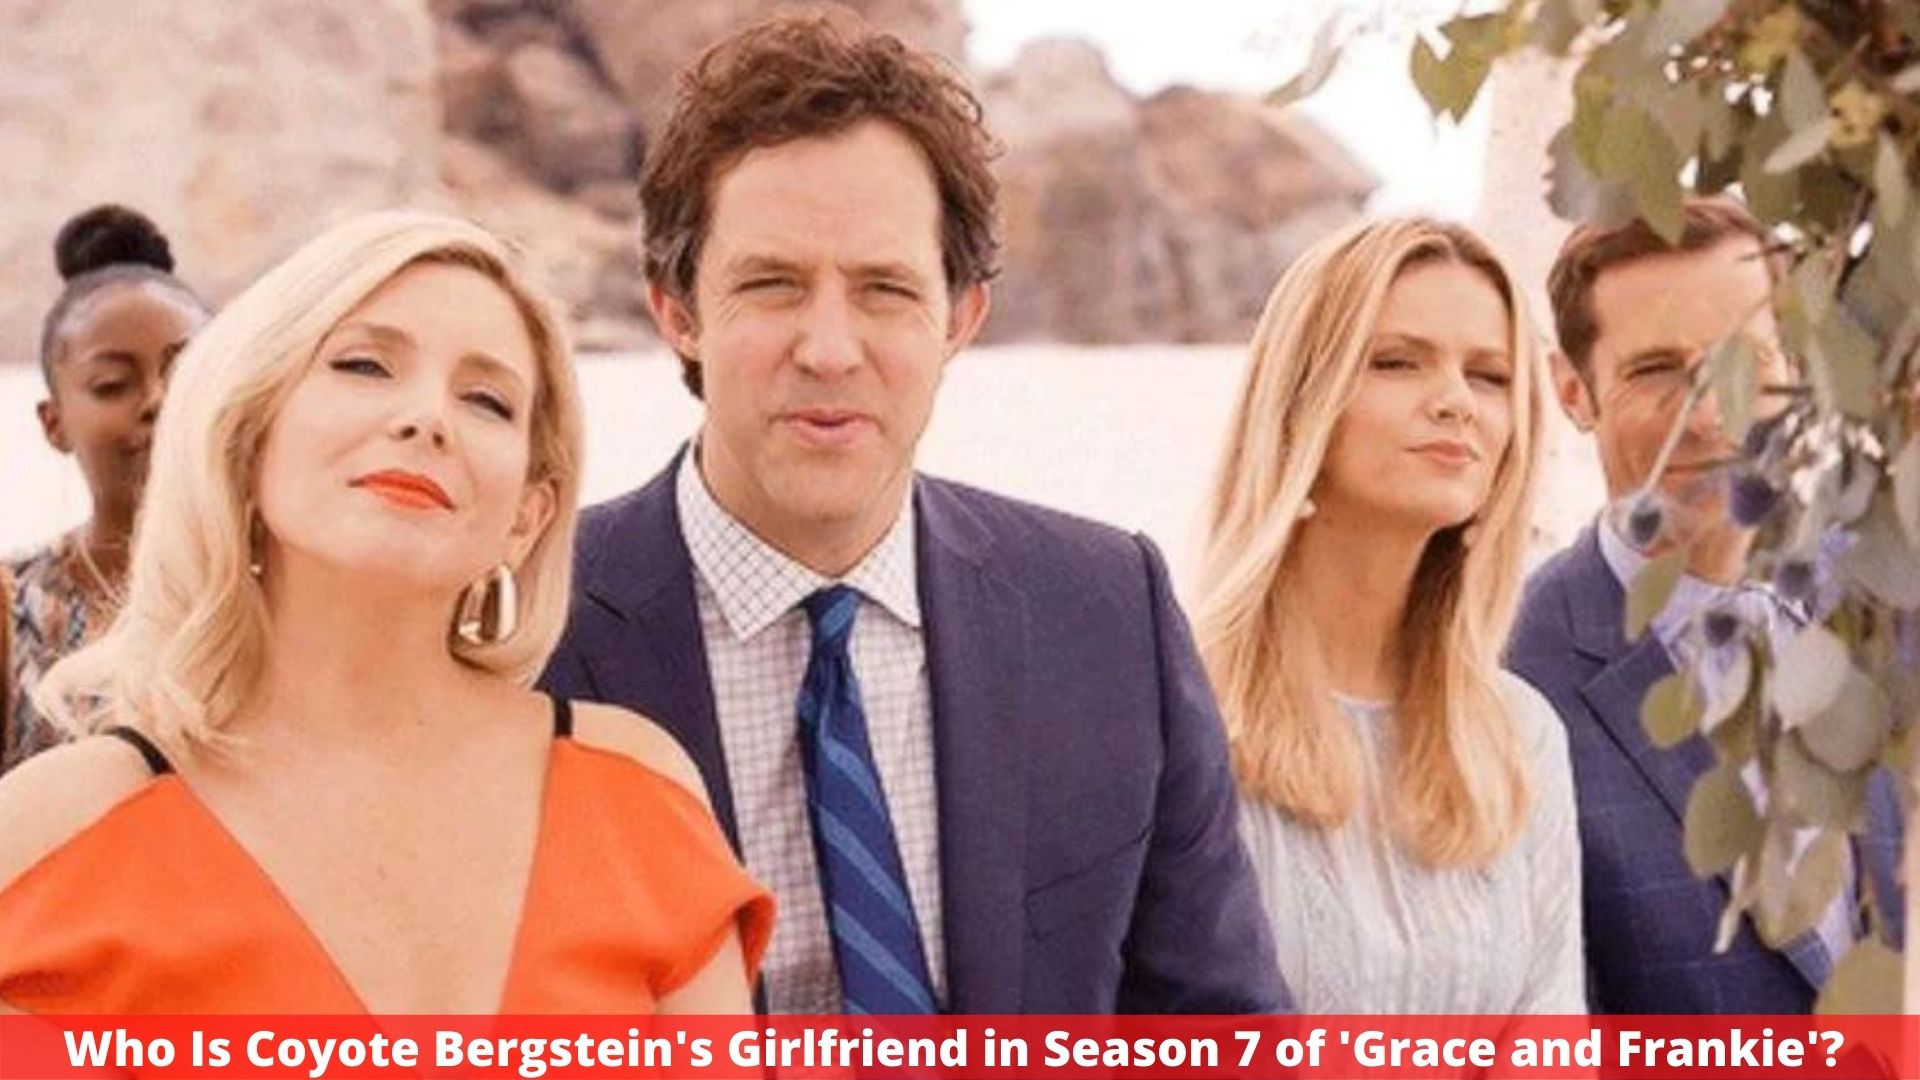 Who Is Coyote Bergstein's Girlfriend in Season 7 of 'Grace and Frankie'? Complete Information!